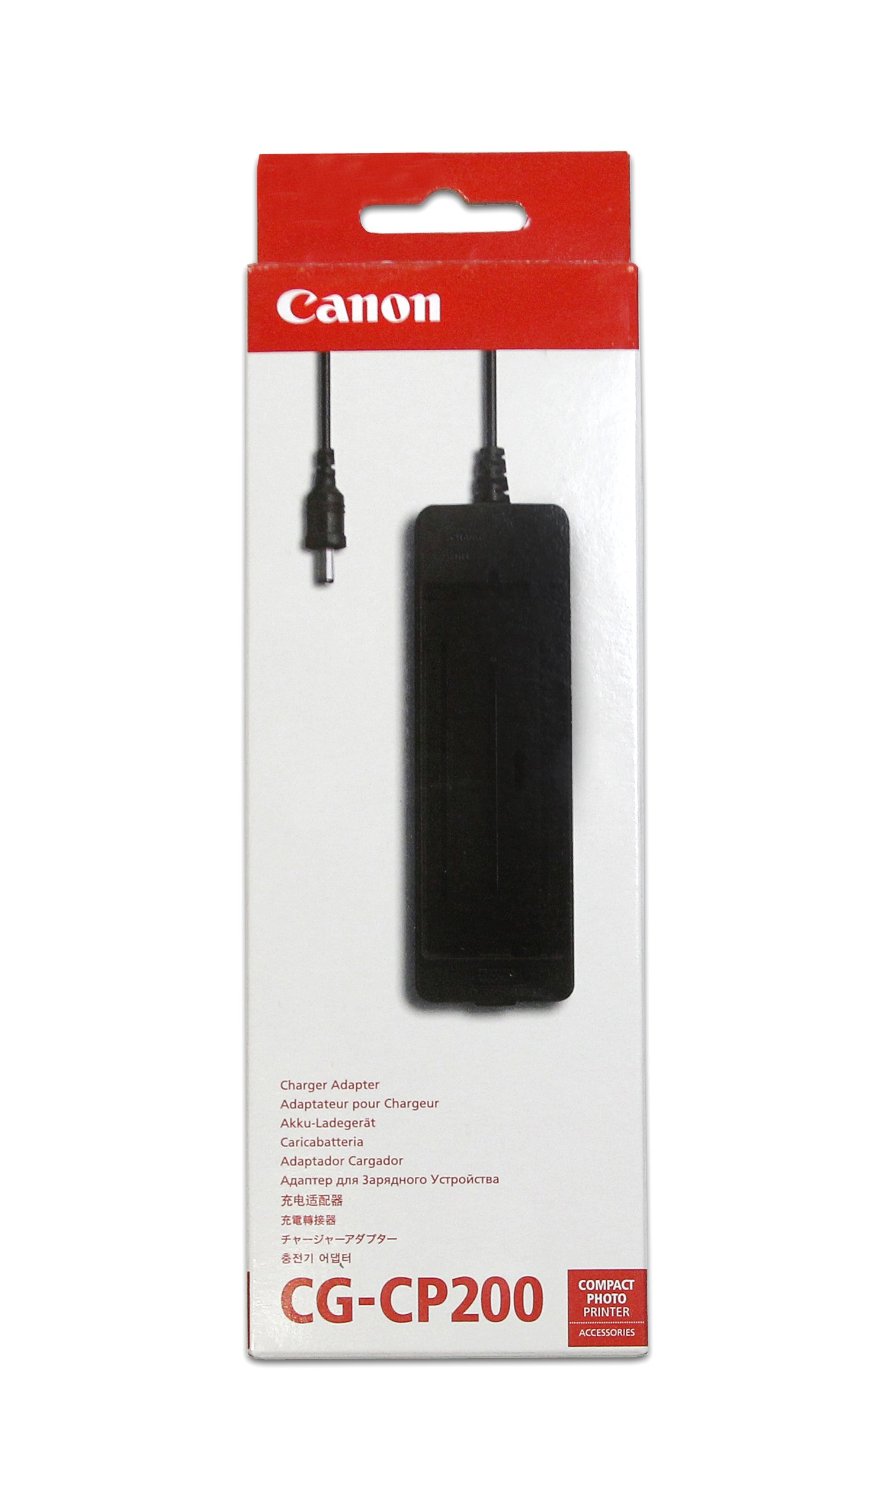 Canon Battery Charger CG-CP200